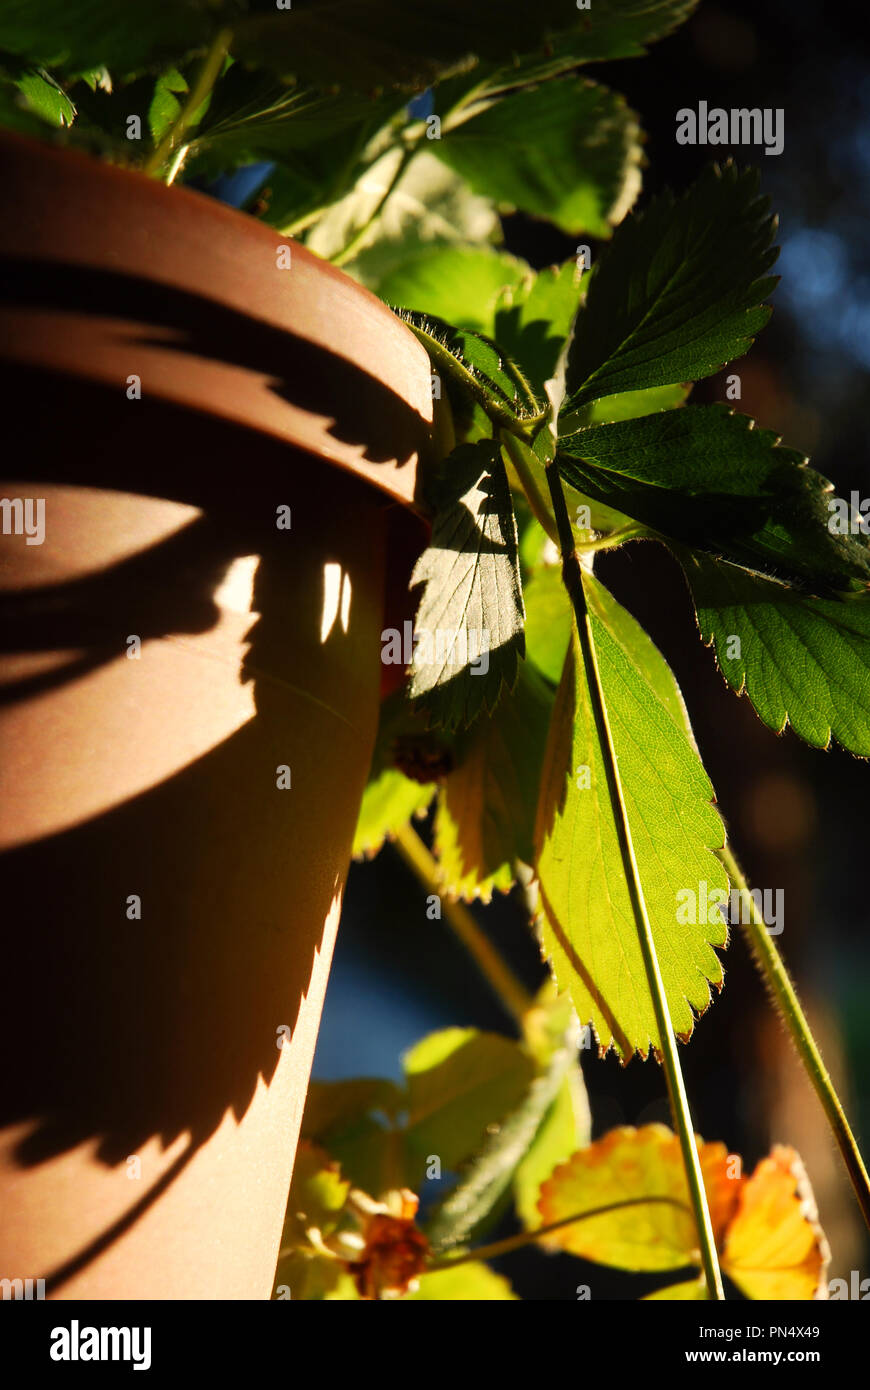 Potted strawberry plant illuminated by the setting sun Stock Photo